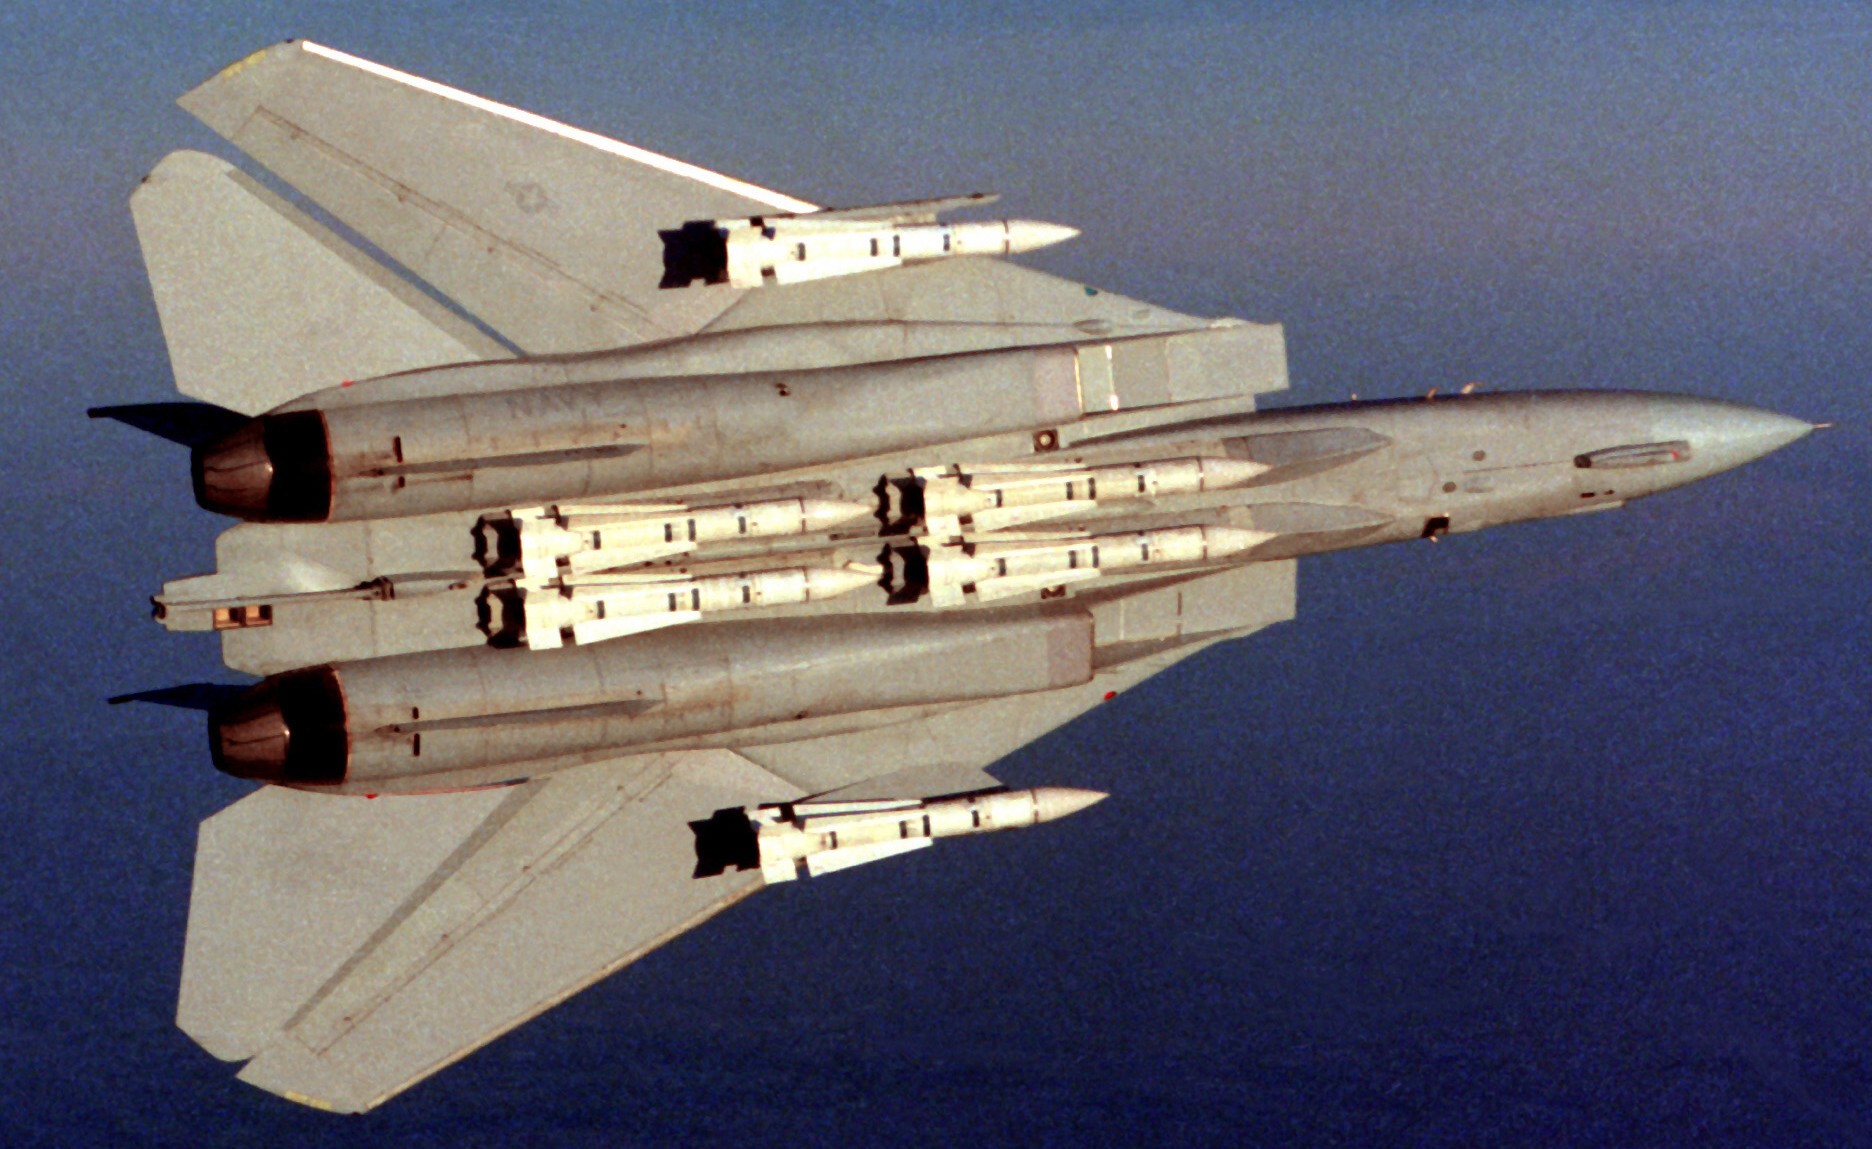 vf-211 fighting checkmates fighter squadron f-14a tomcat us navy carrier air wing cvw-9 uss nimitz cvn-68 99